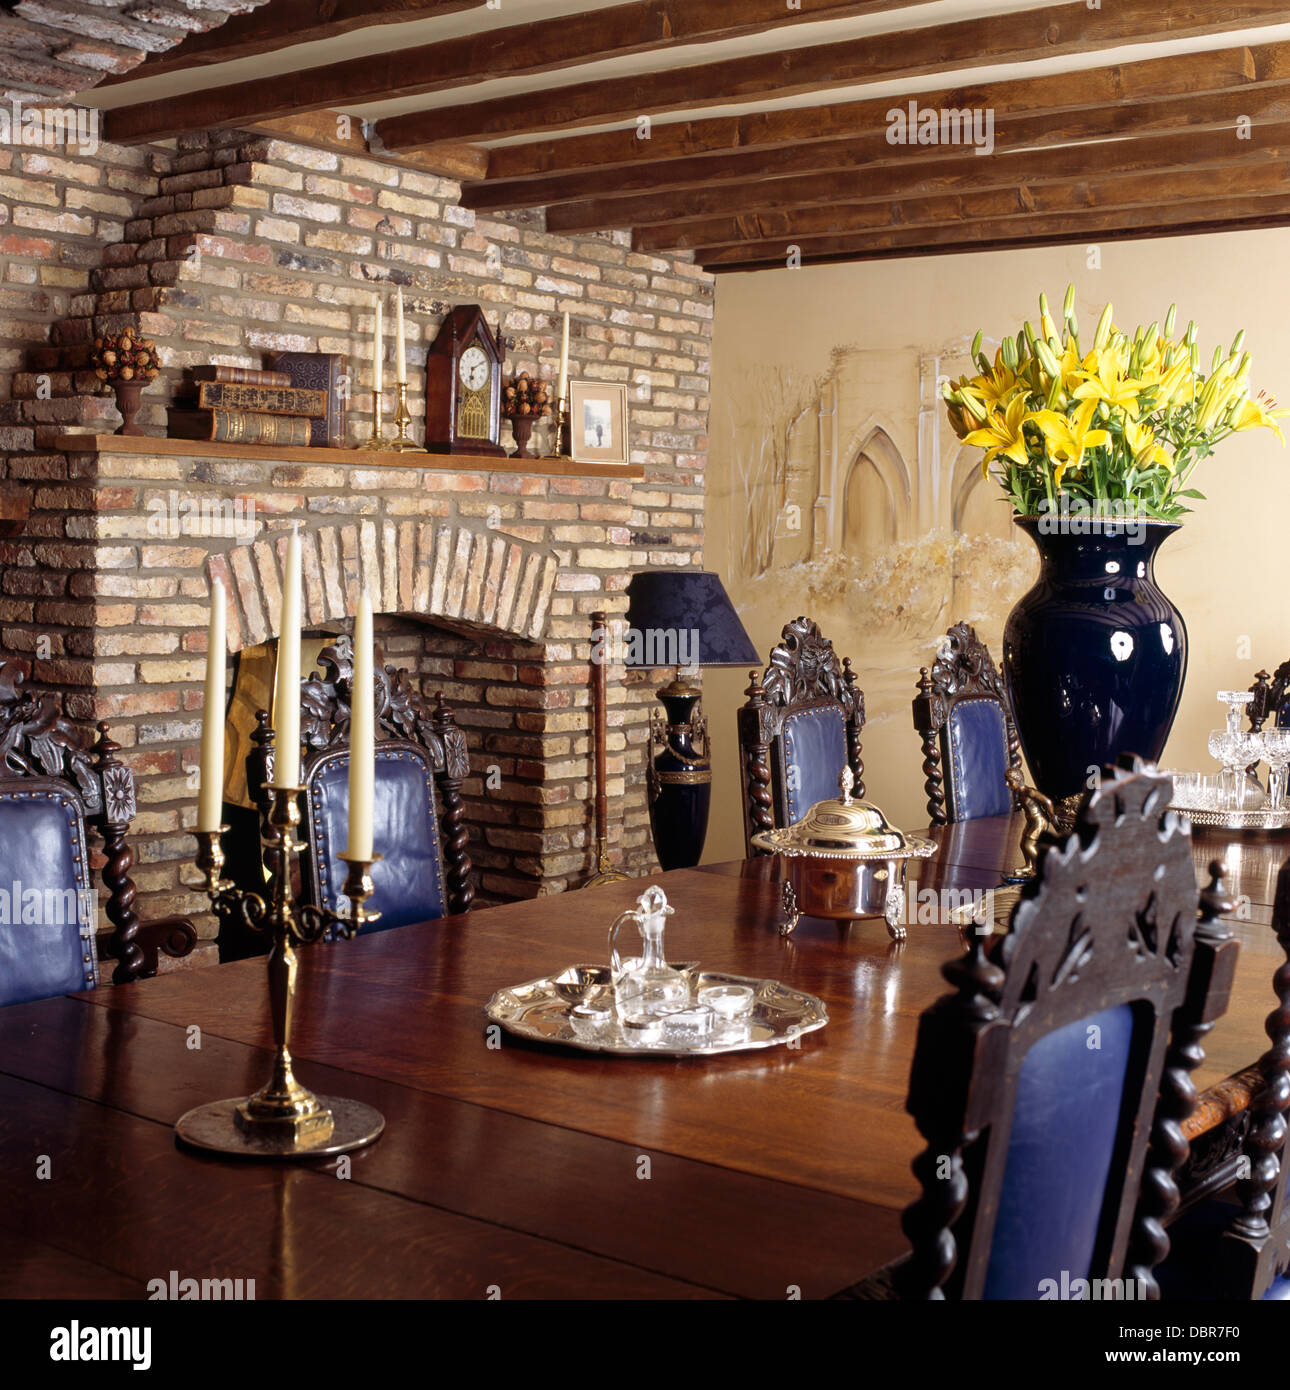 Vase of yellow lilies on table with Jacobean-style chairs with blue leather backs in beamed country dining room Stock Photo